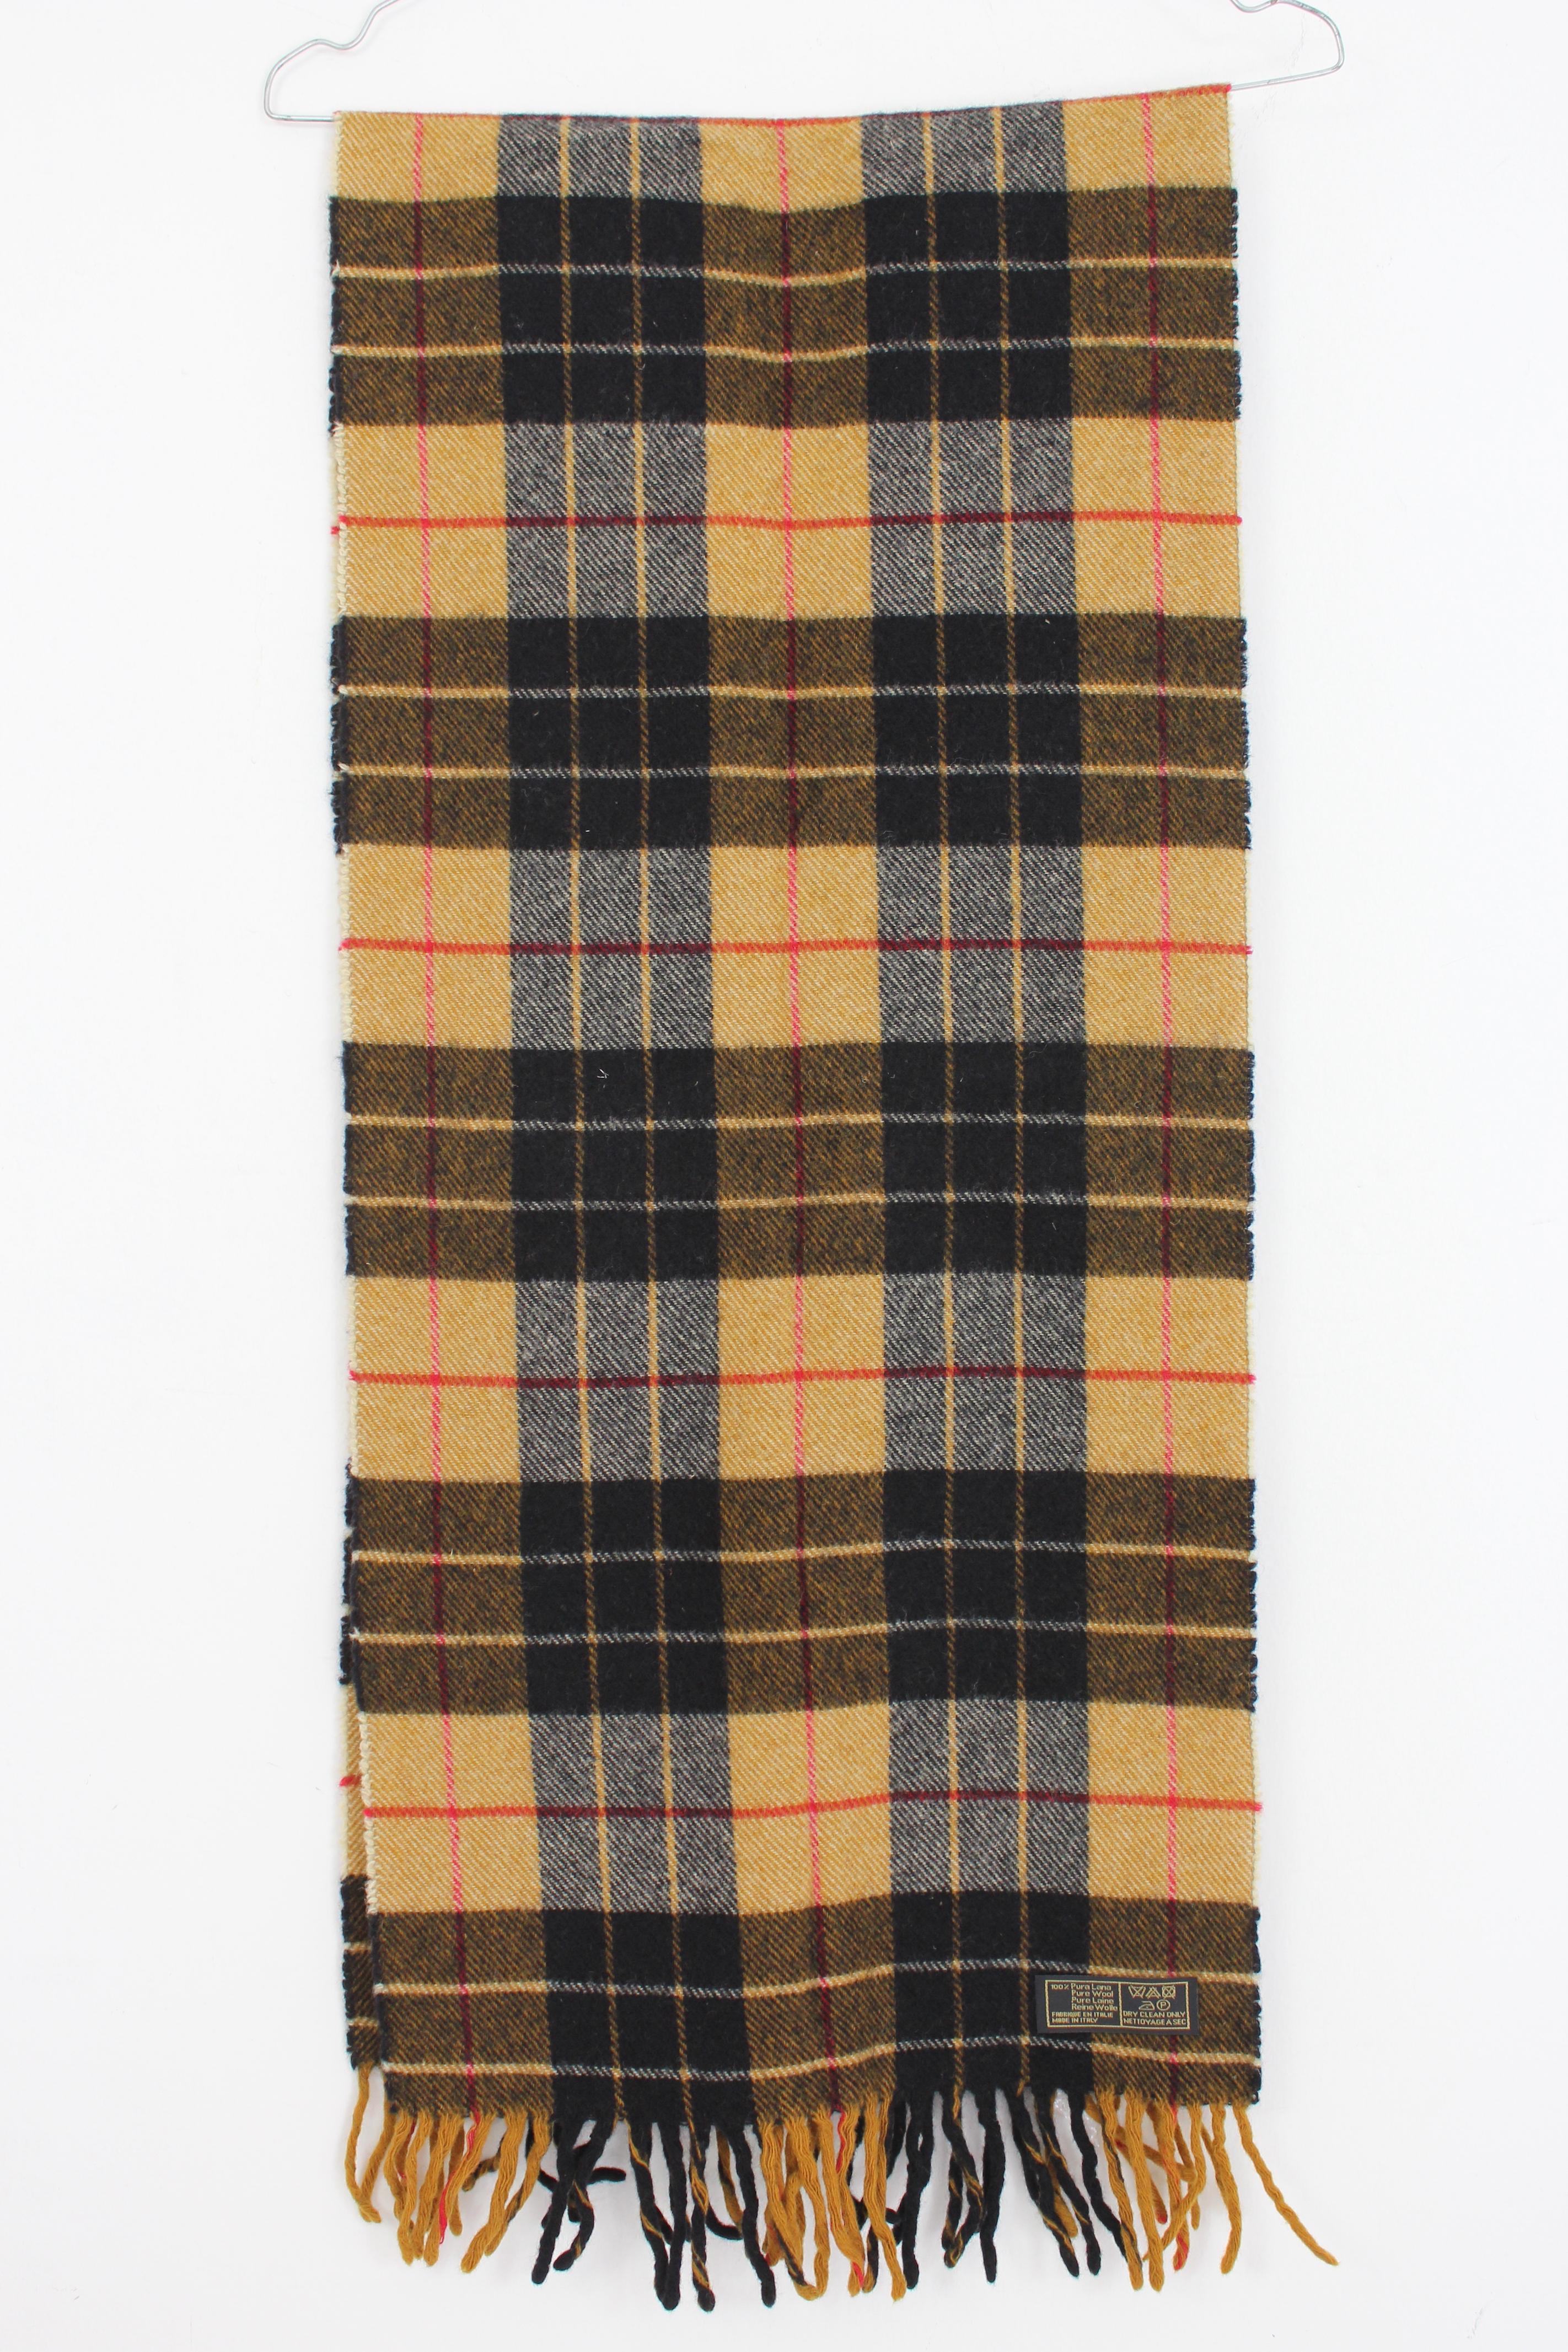 Fay vintage 2000s men's scarf. Scarf with beige and black checked pattern. 100% wool fabric. Made in Italy.

Condition: Excellent

Item used few times, it remains in its excellent condition. There are no visible signs of wear, and it is almost as